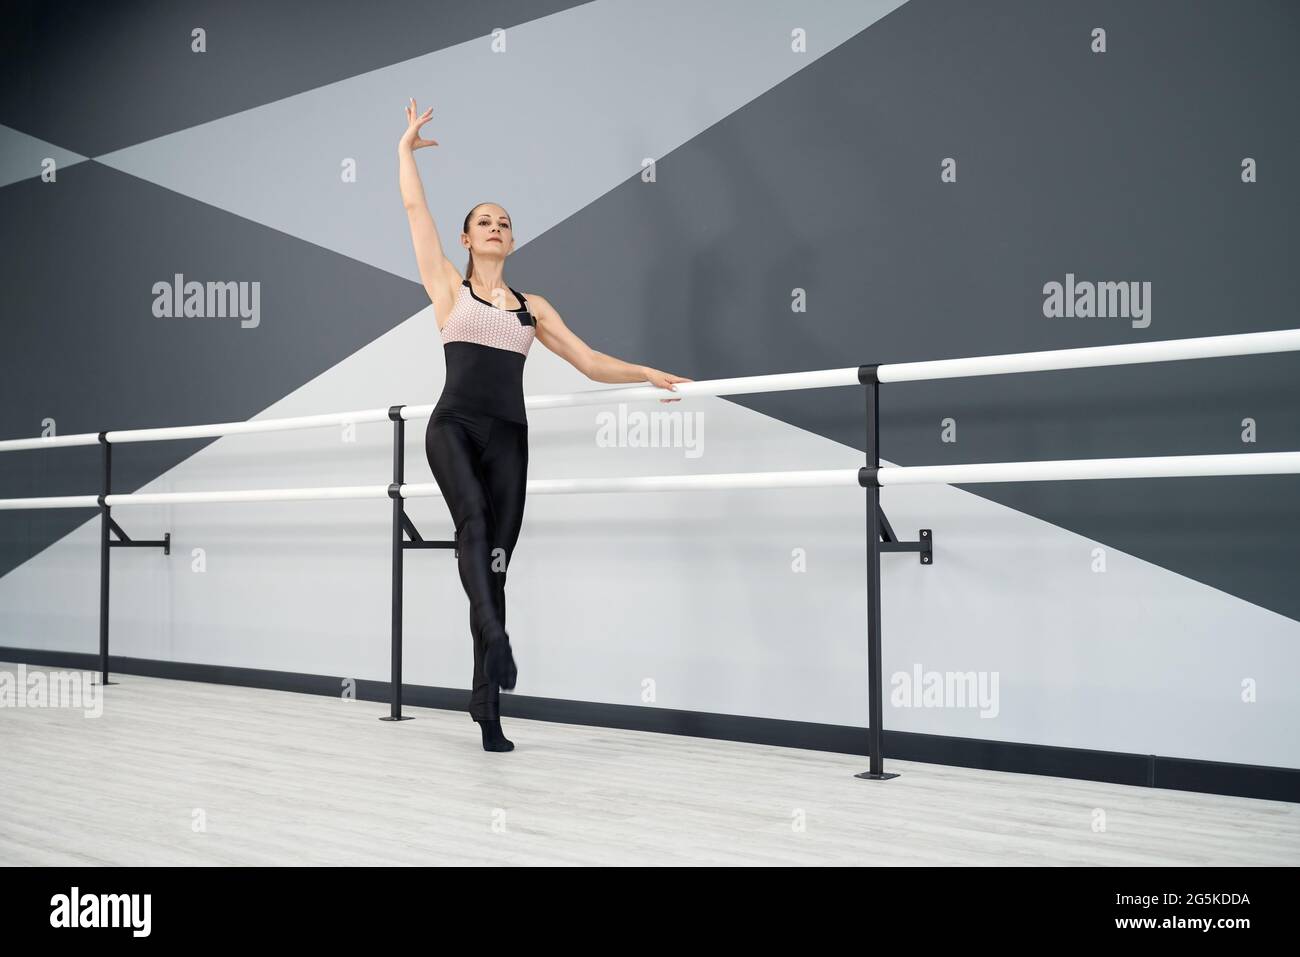 Front view of sportswoman in tight outfit posing with hand up, holding handrails in ballet studio. Graceful female adult athlete training in empty hall. Concept of choreography, gymnastics. Stock Photo